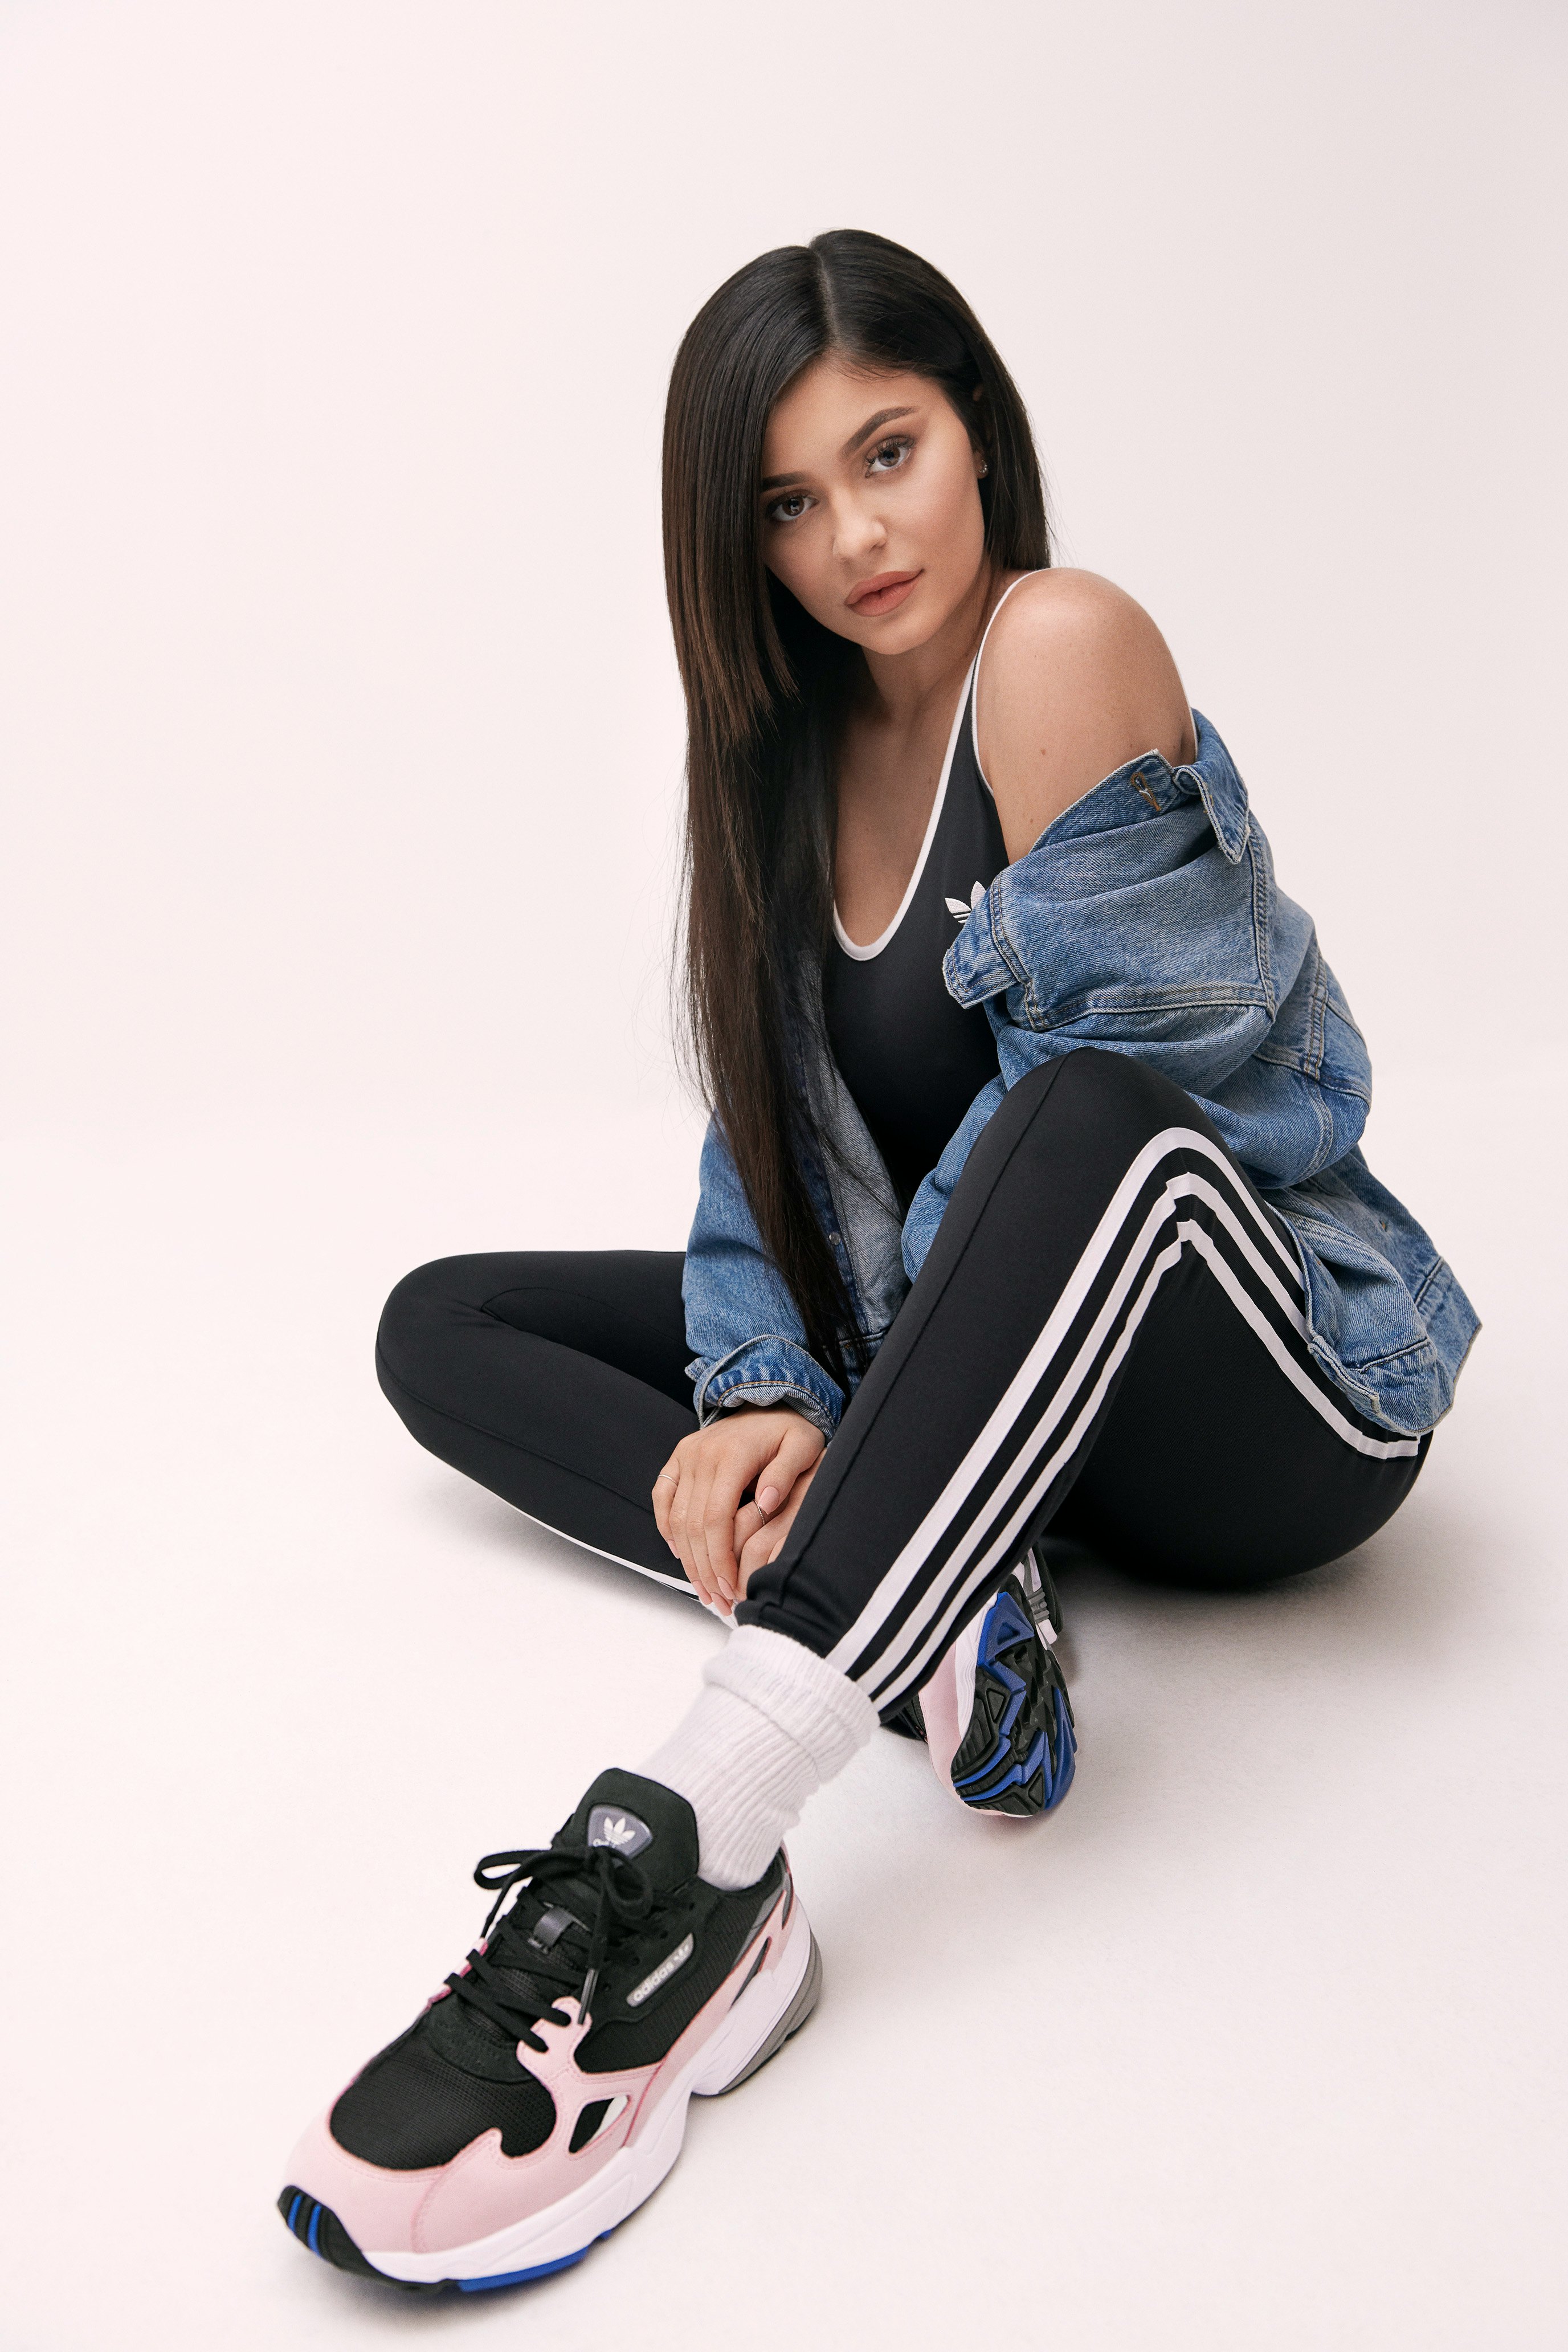 kylie jenner adidas clothes